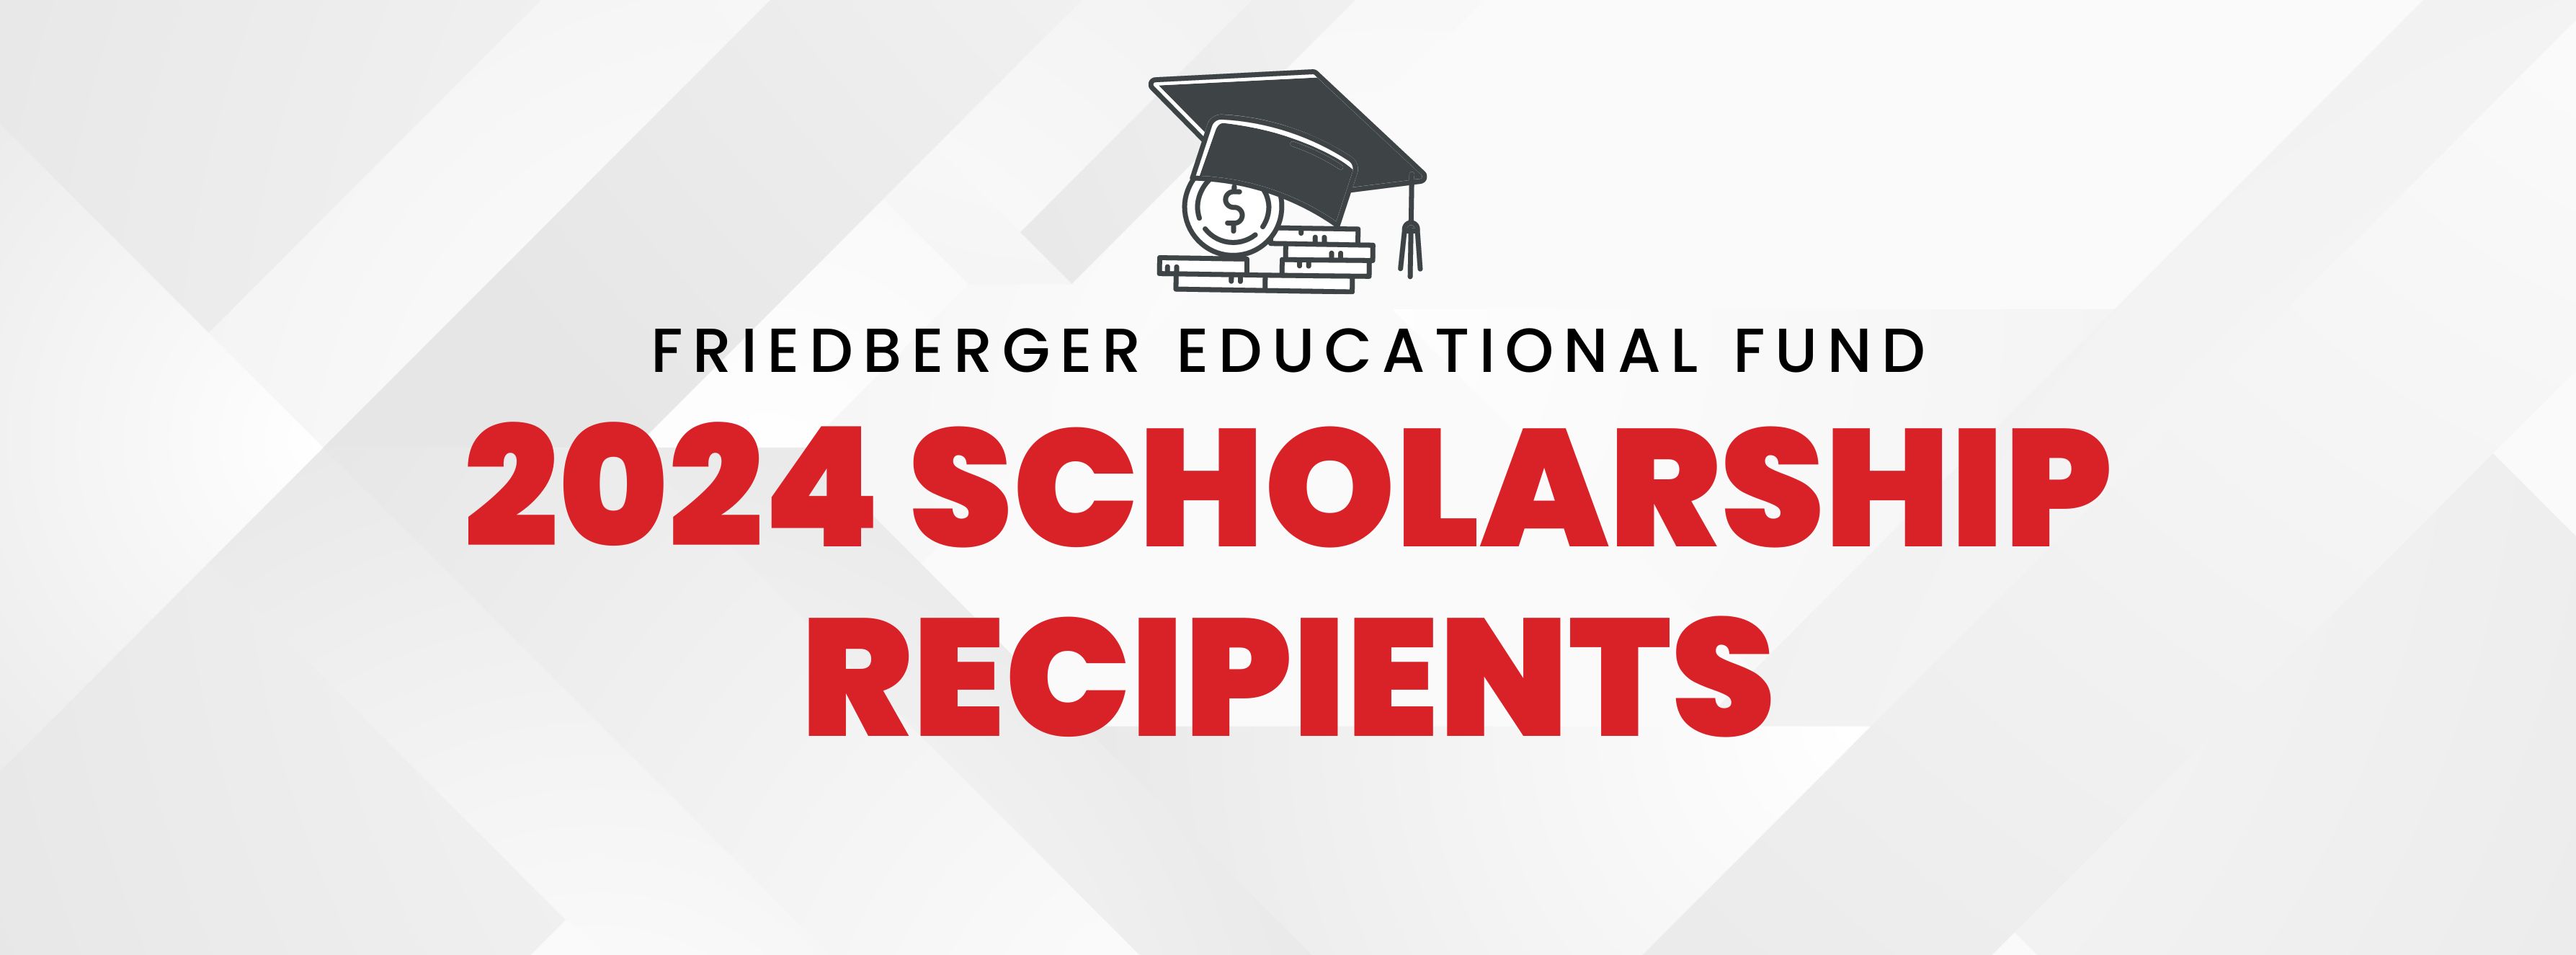 Friedberger Educational Fund Scholarship Awards Announced